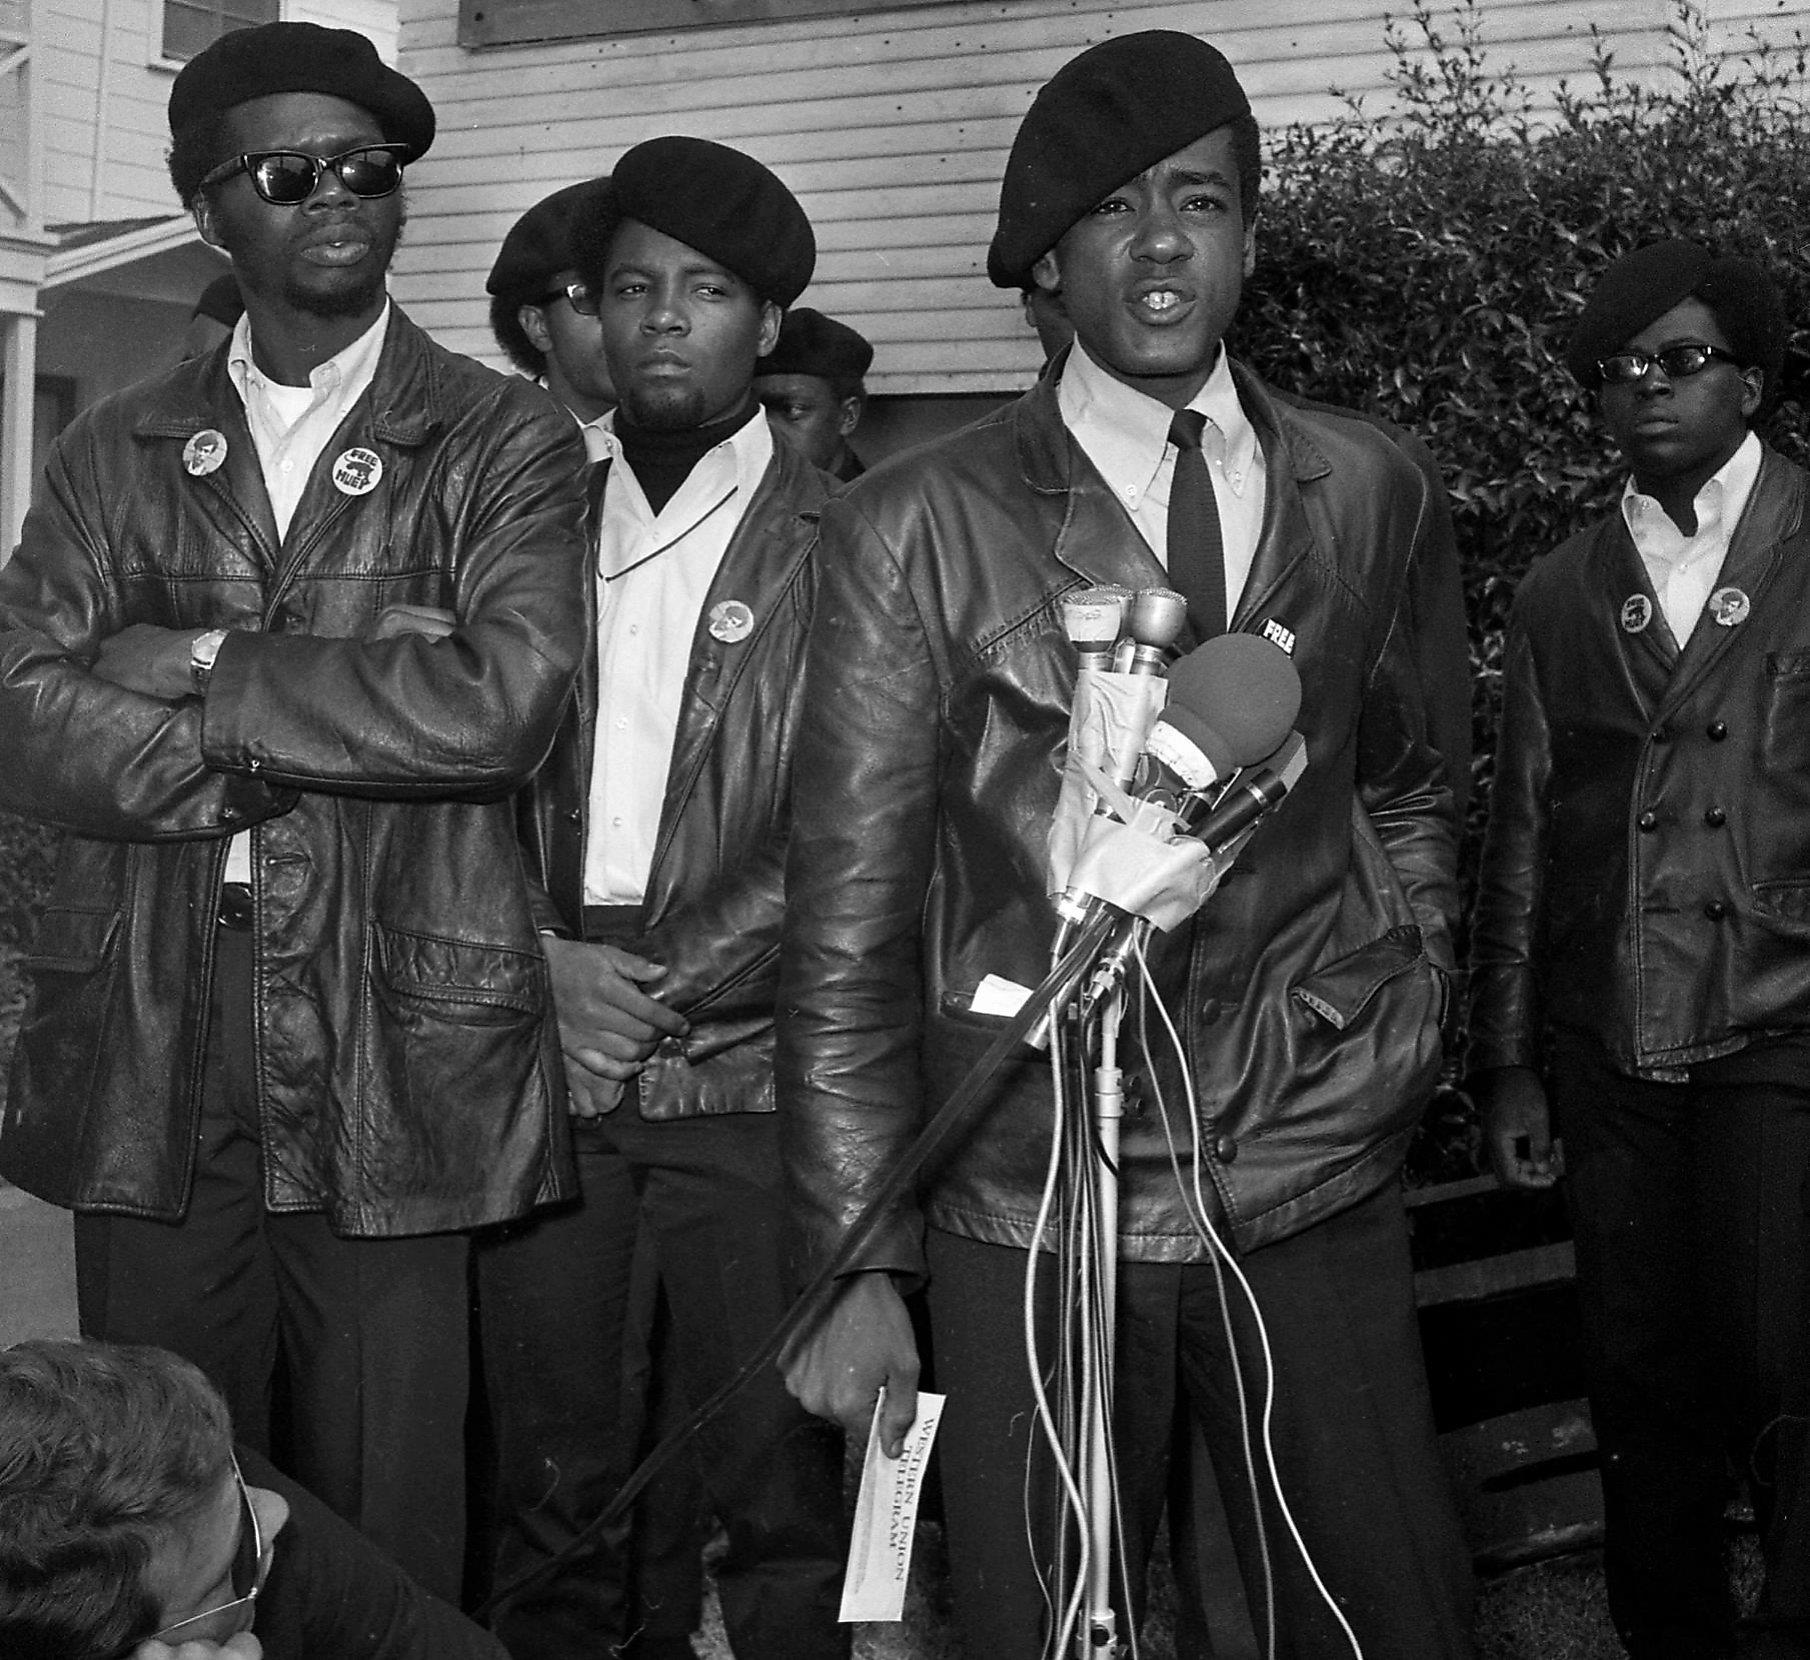 Bobby Seale, Black Panthers founder, writes his own history